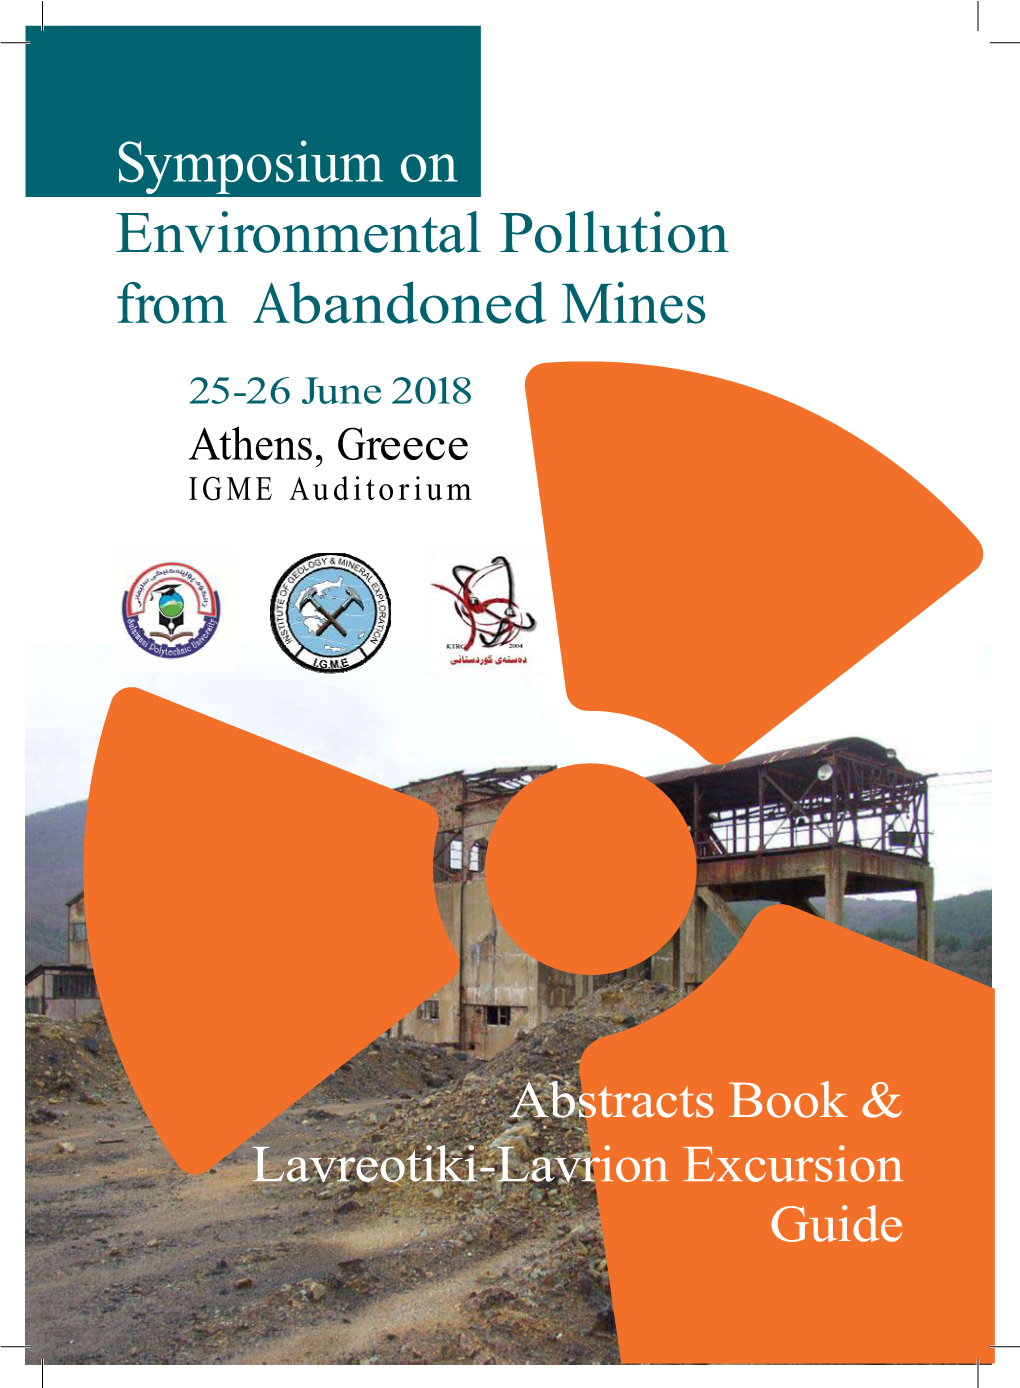 Symposium on Environmental Pollution from Abandoned Mines